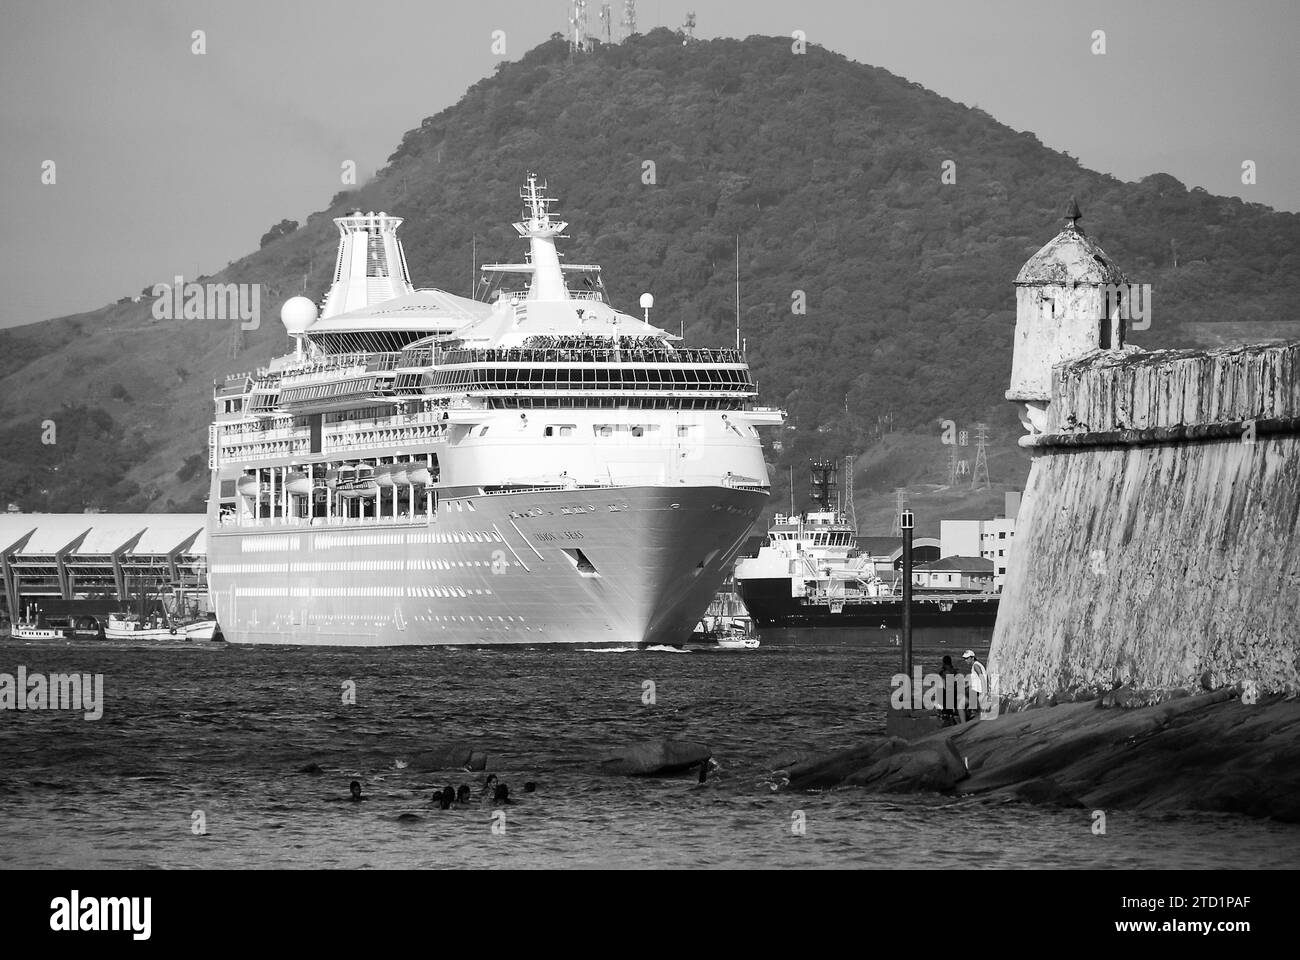 City of Santos, Brazil. Royal Caribbean's Vision of the Seas cruise sailing close to Barra Fortress in the Port of Santos channel. Black and white. Stock Photo